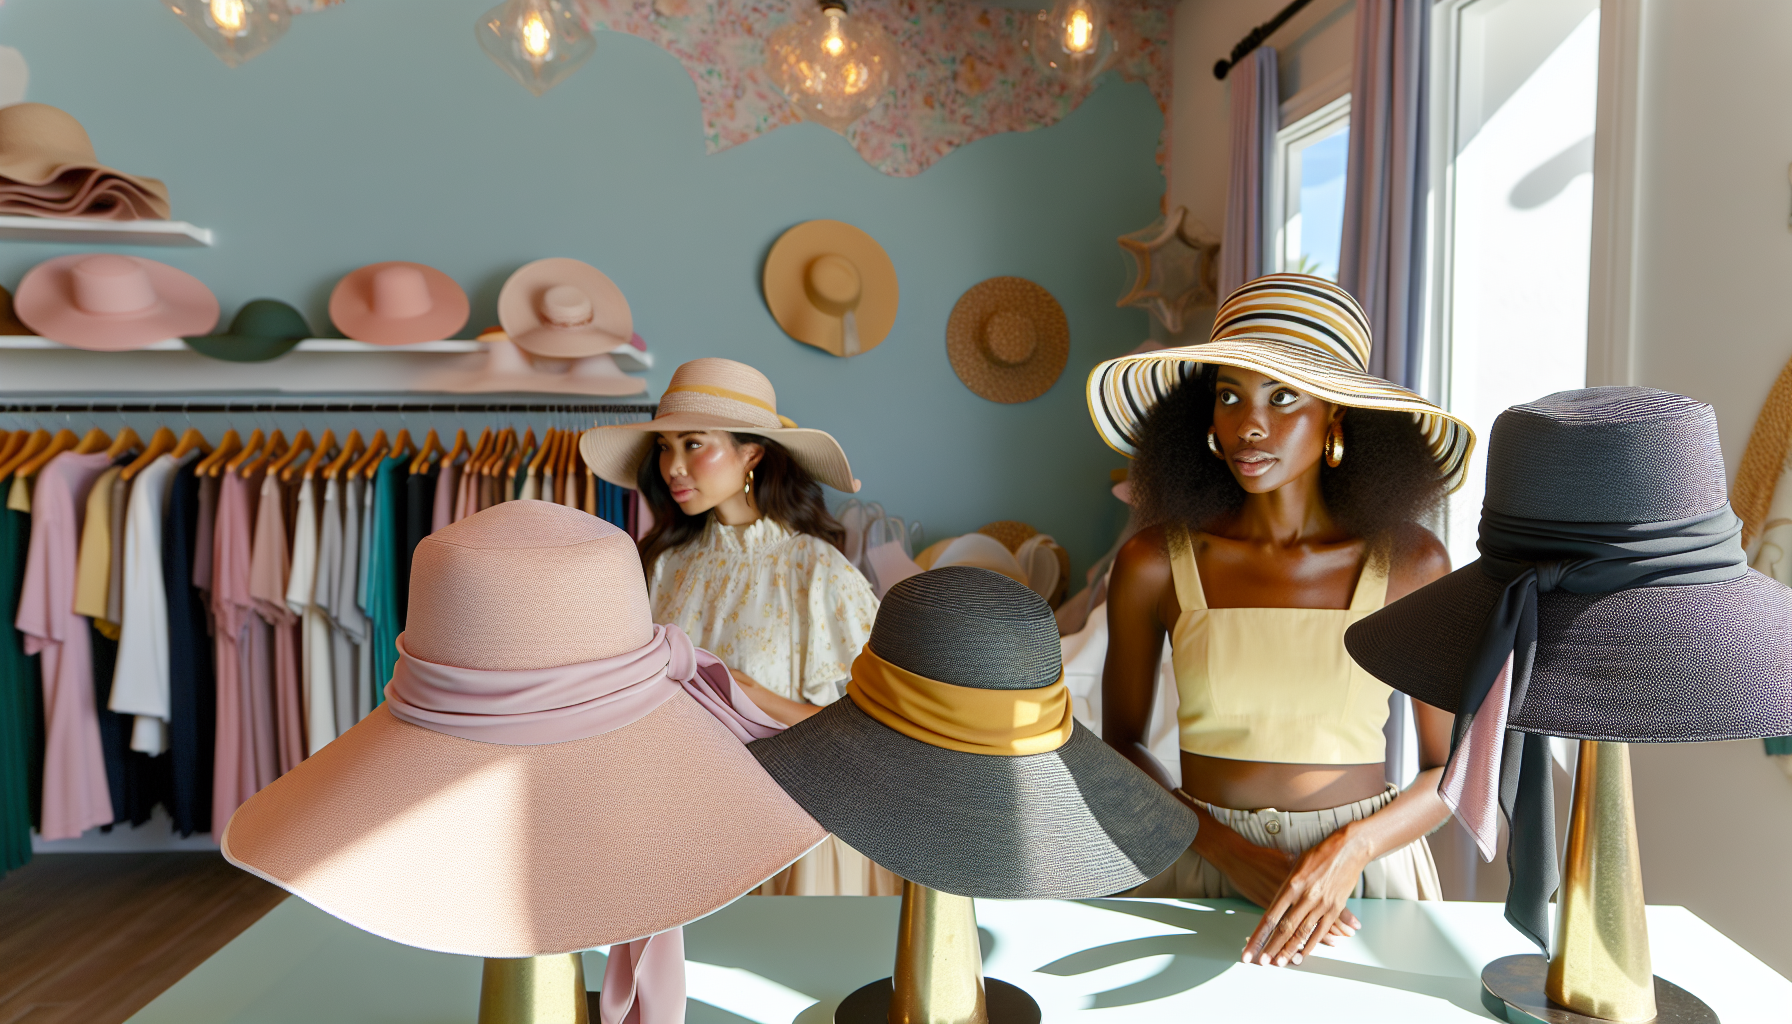 A collection of stylish women's sun hats